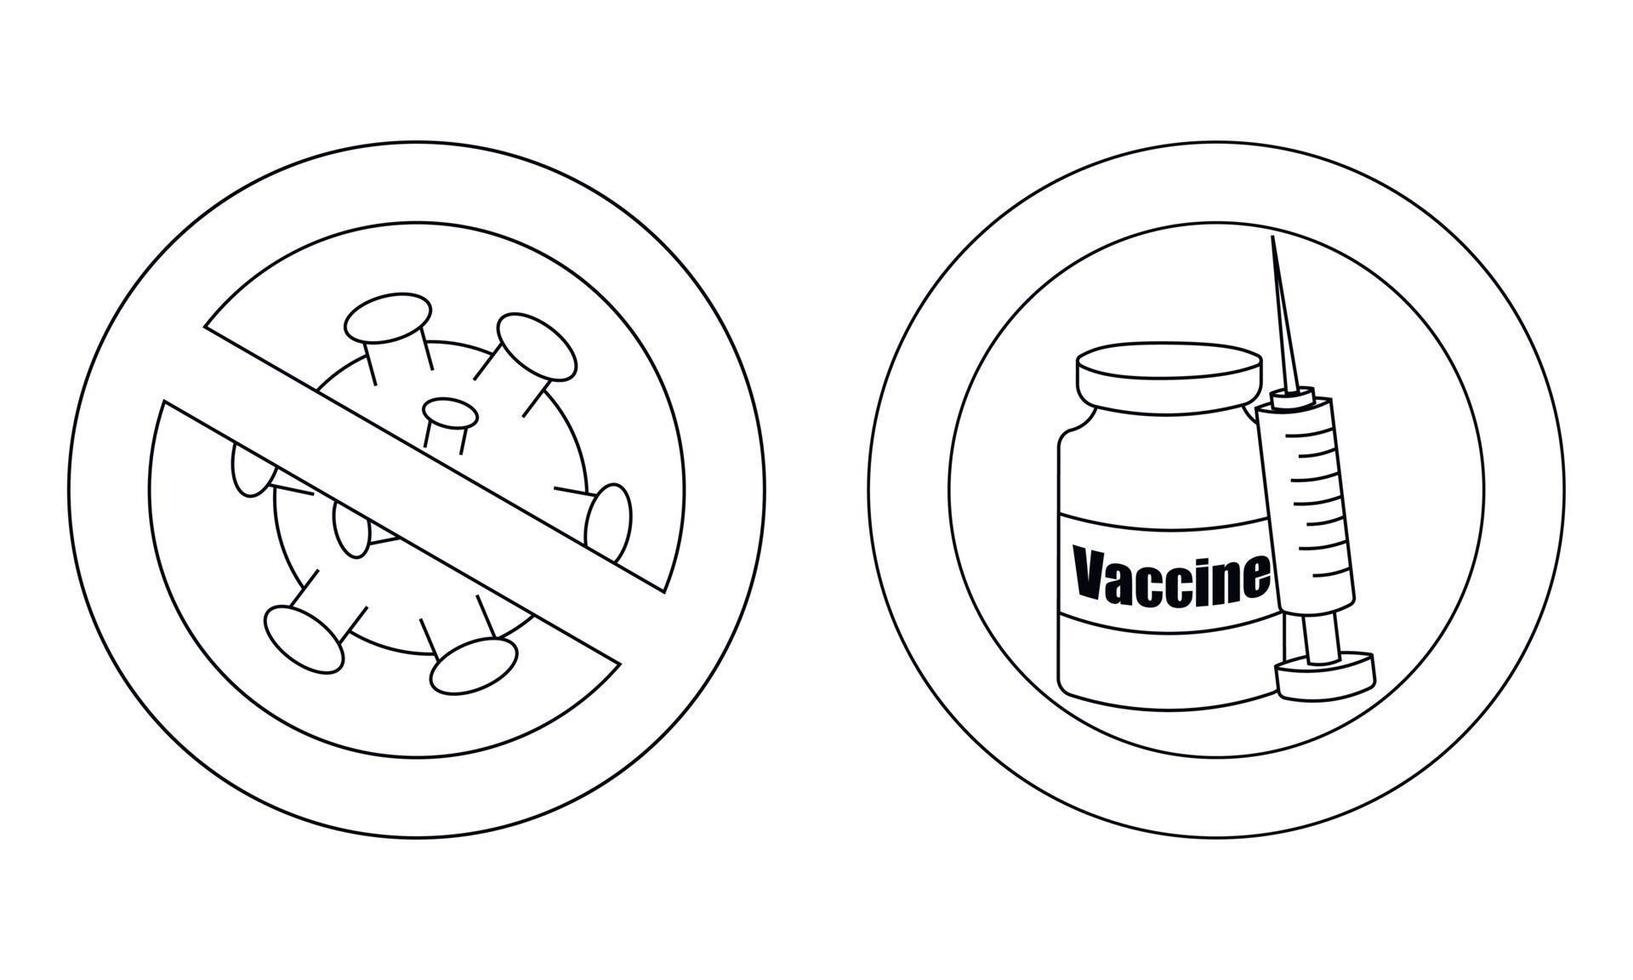 Vaccine in circle and virus in forbidden. Draw illustration in black and white vector